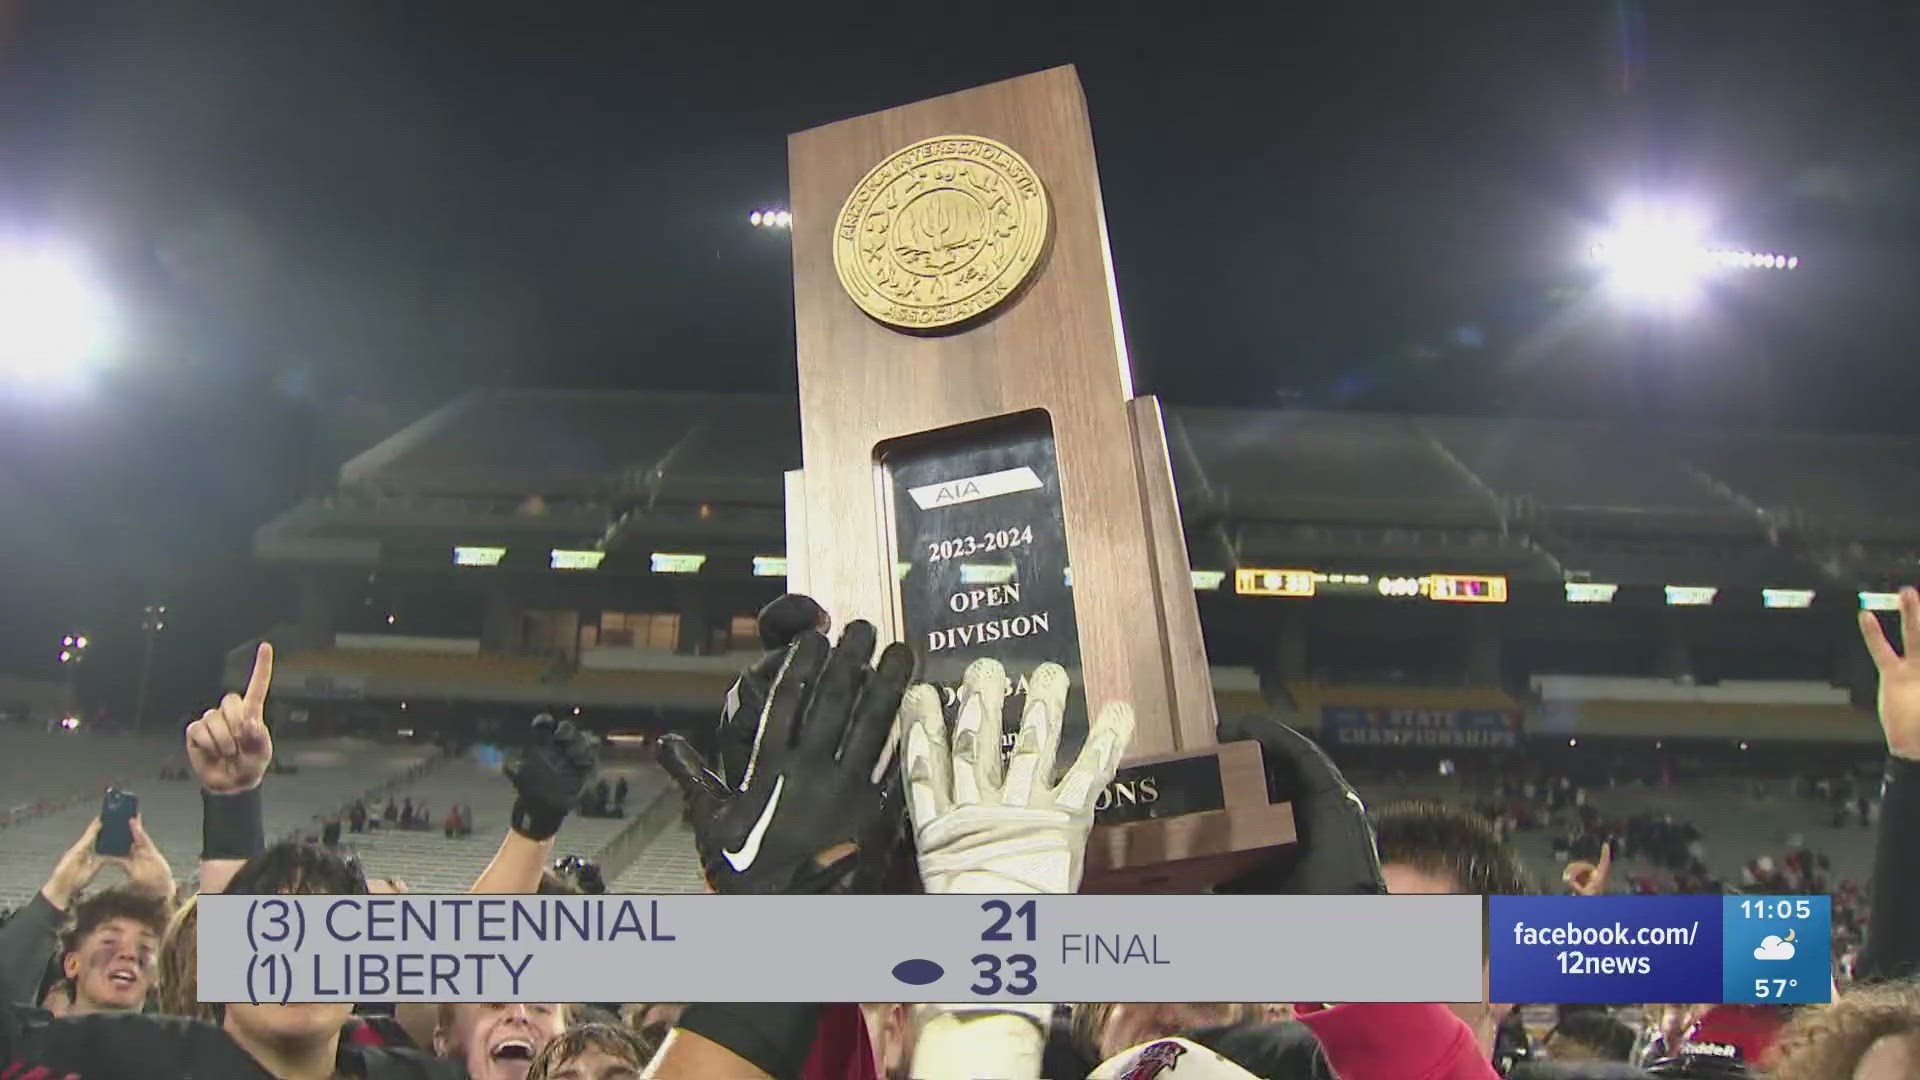 Meet your new kings of Arizona high school football, the Liberty Lions! Here are extended highlights and postgame reaction from the Open Division state title game